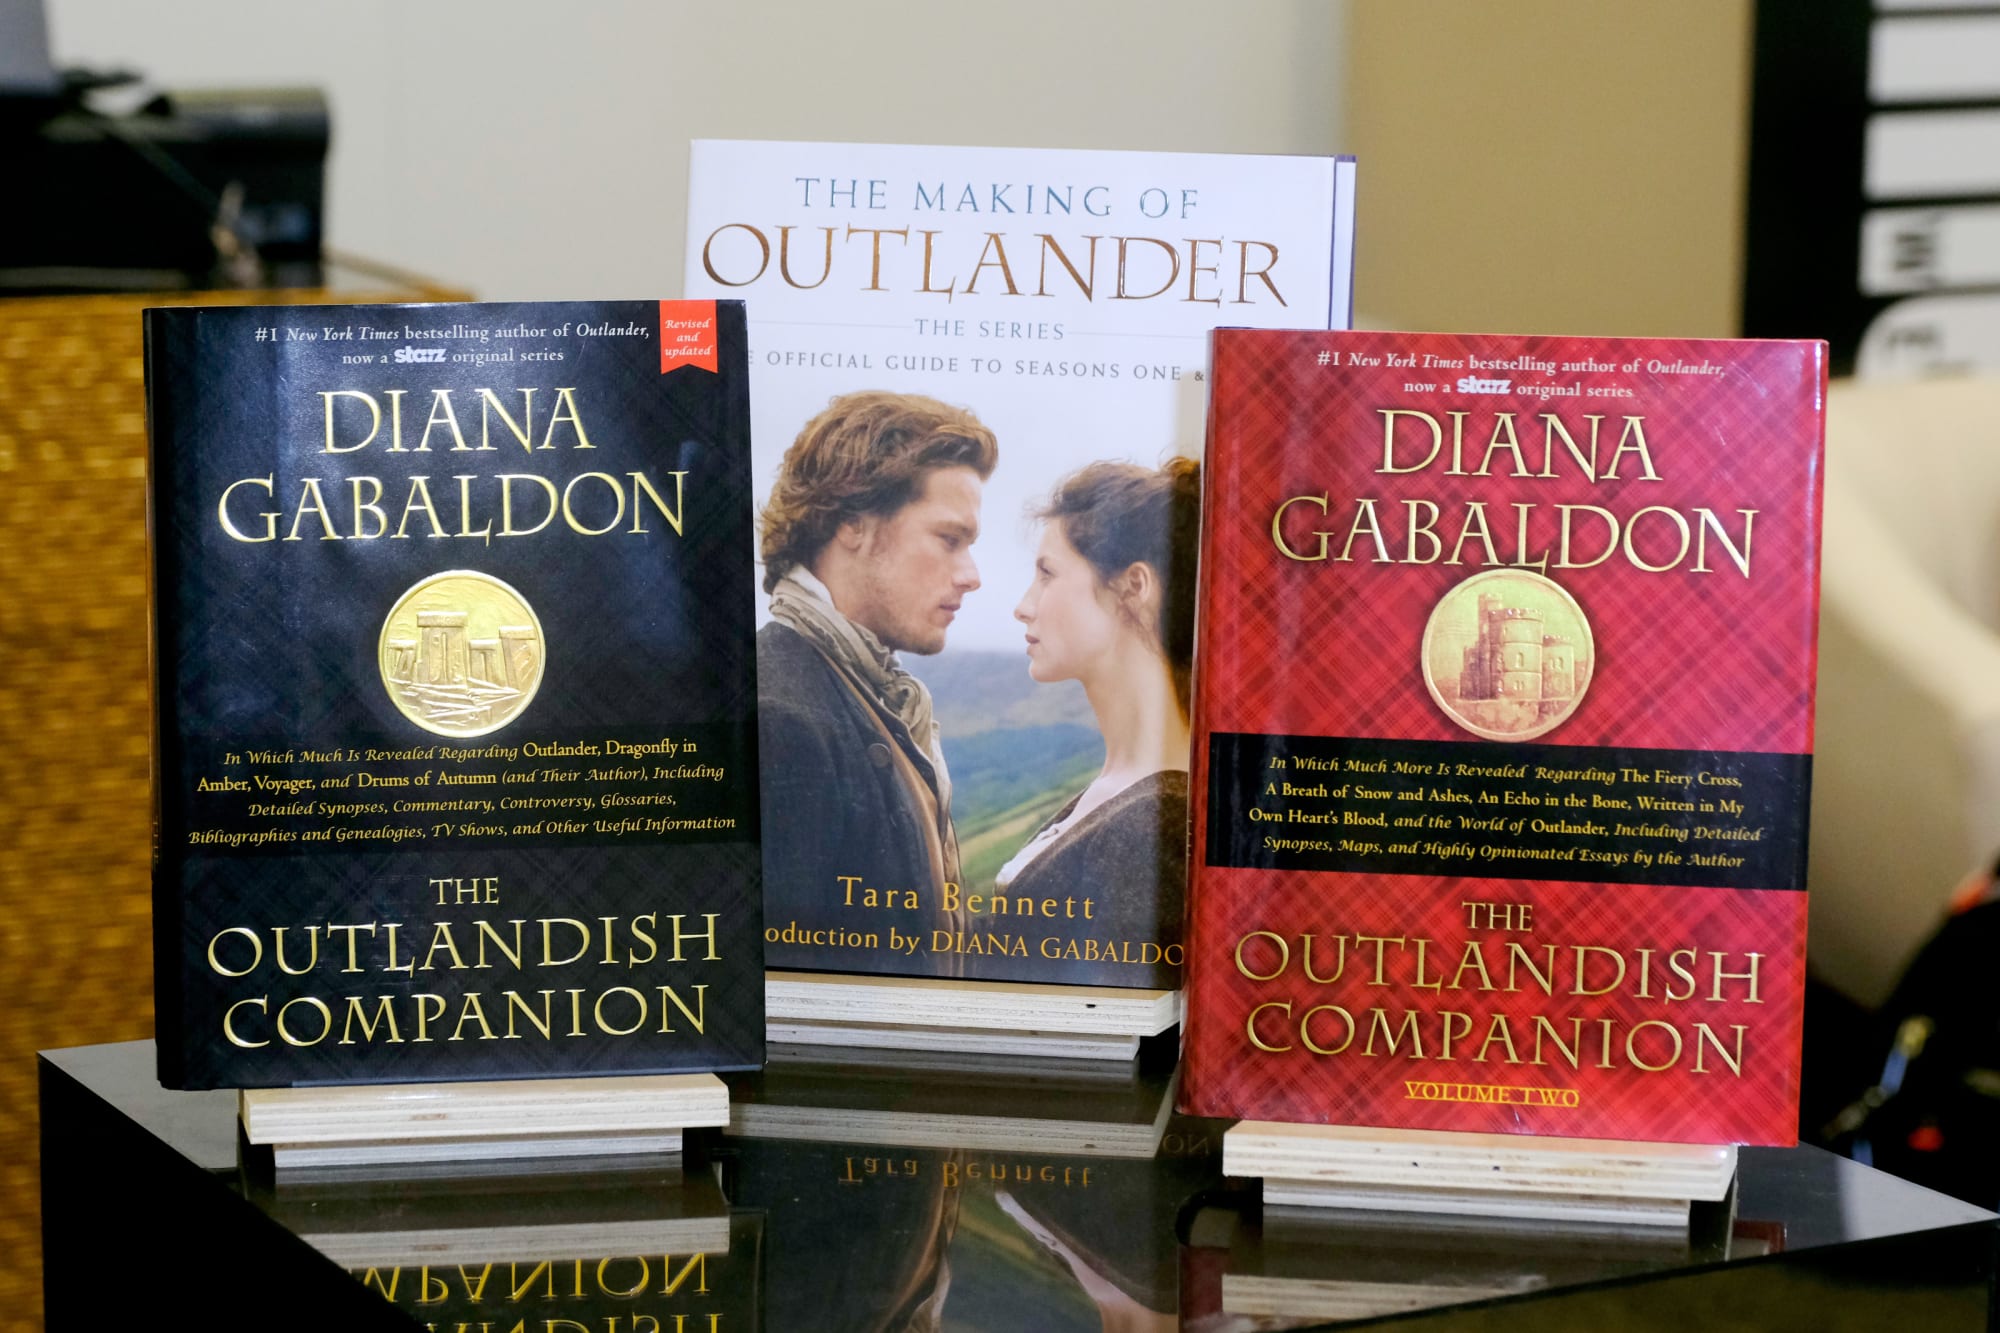 Will Outlander Book 9 be released before Season 5?